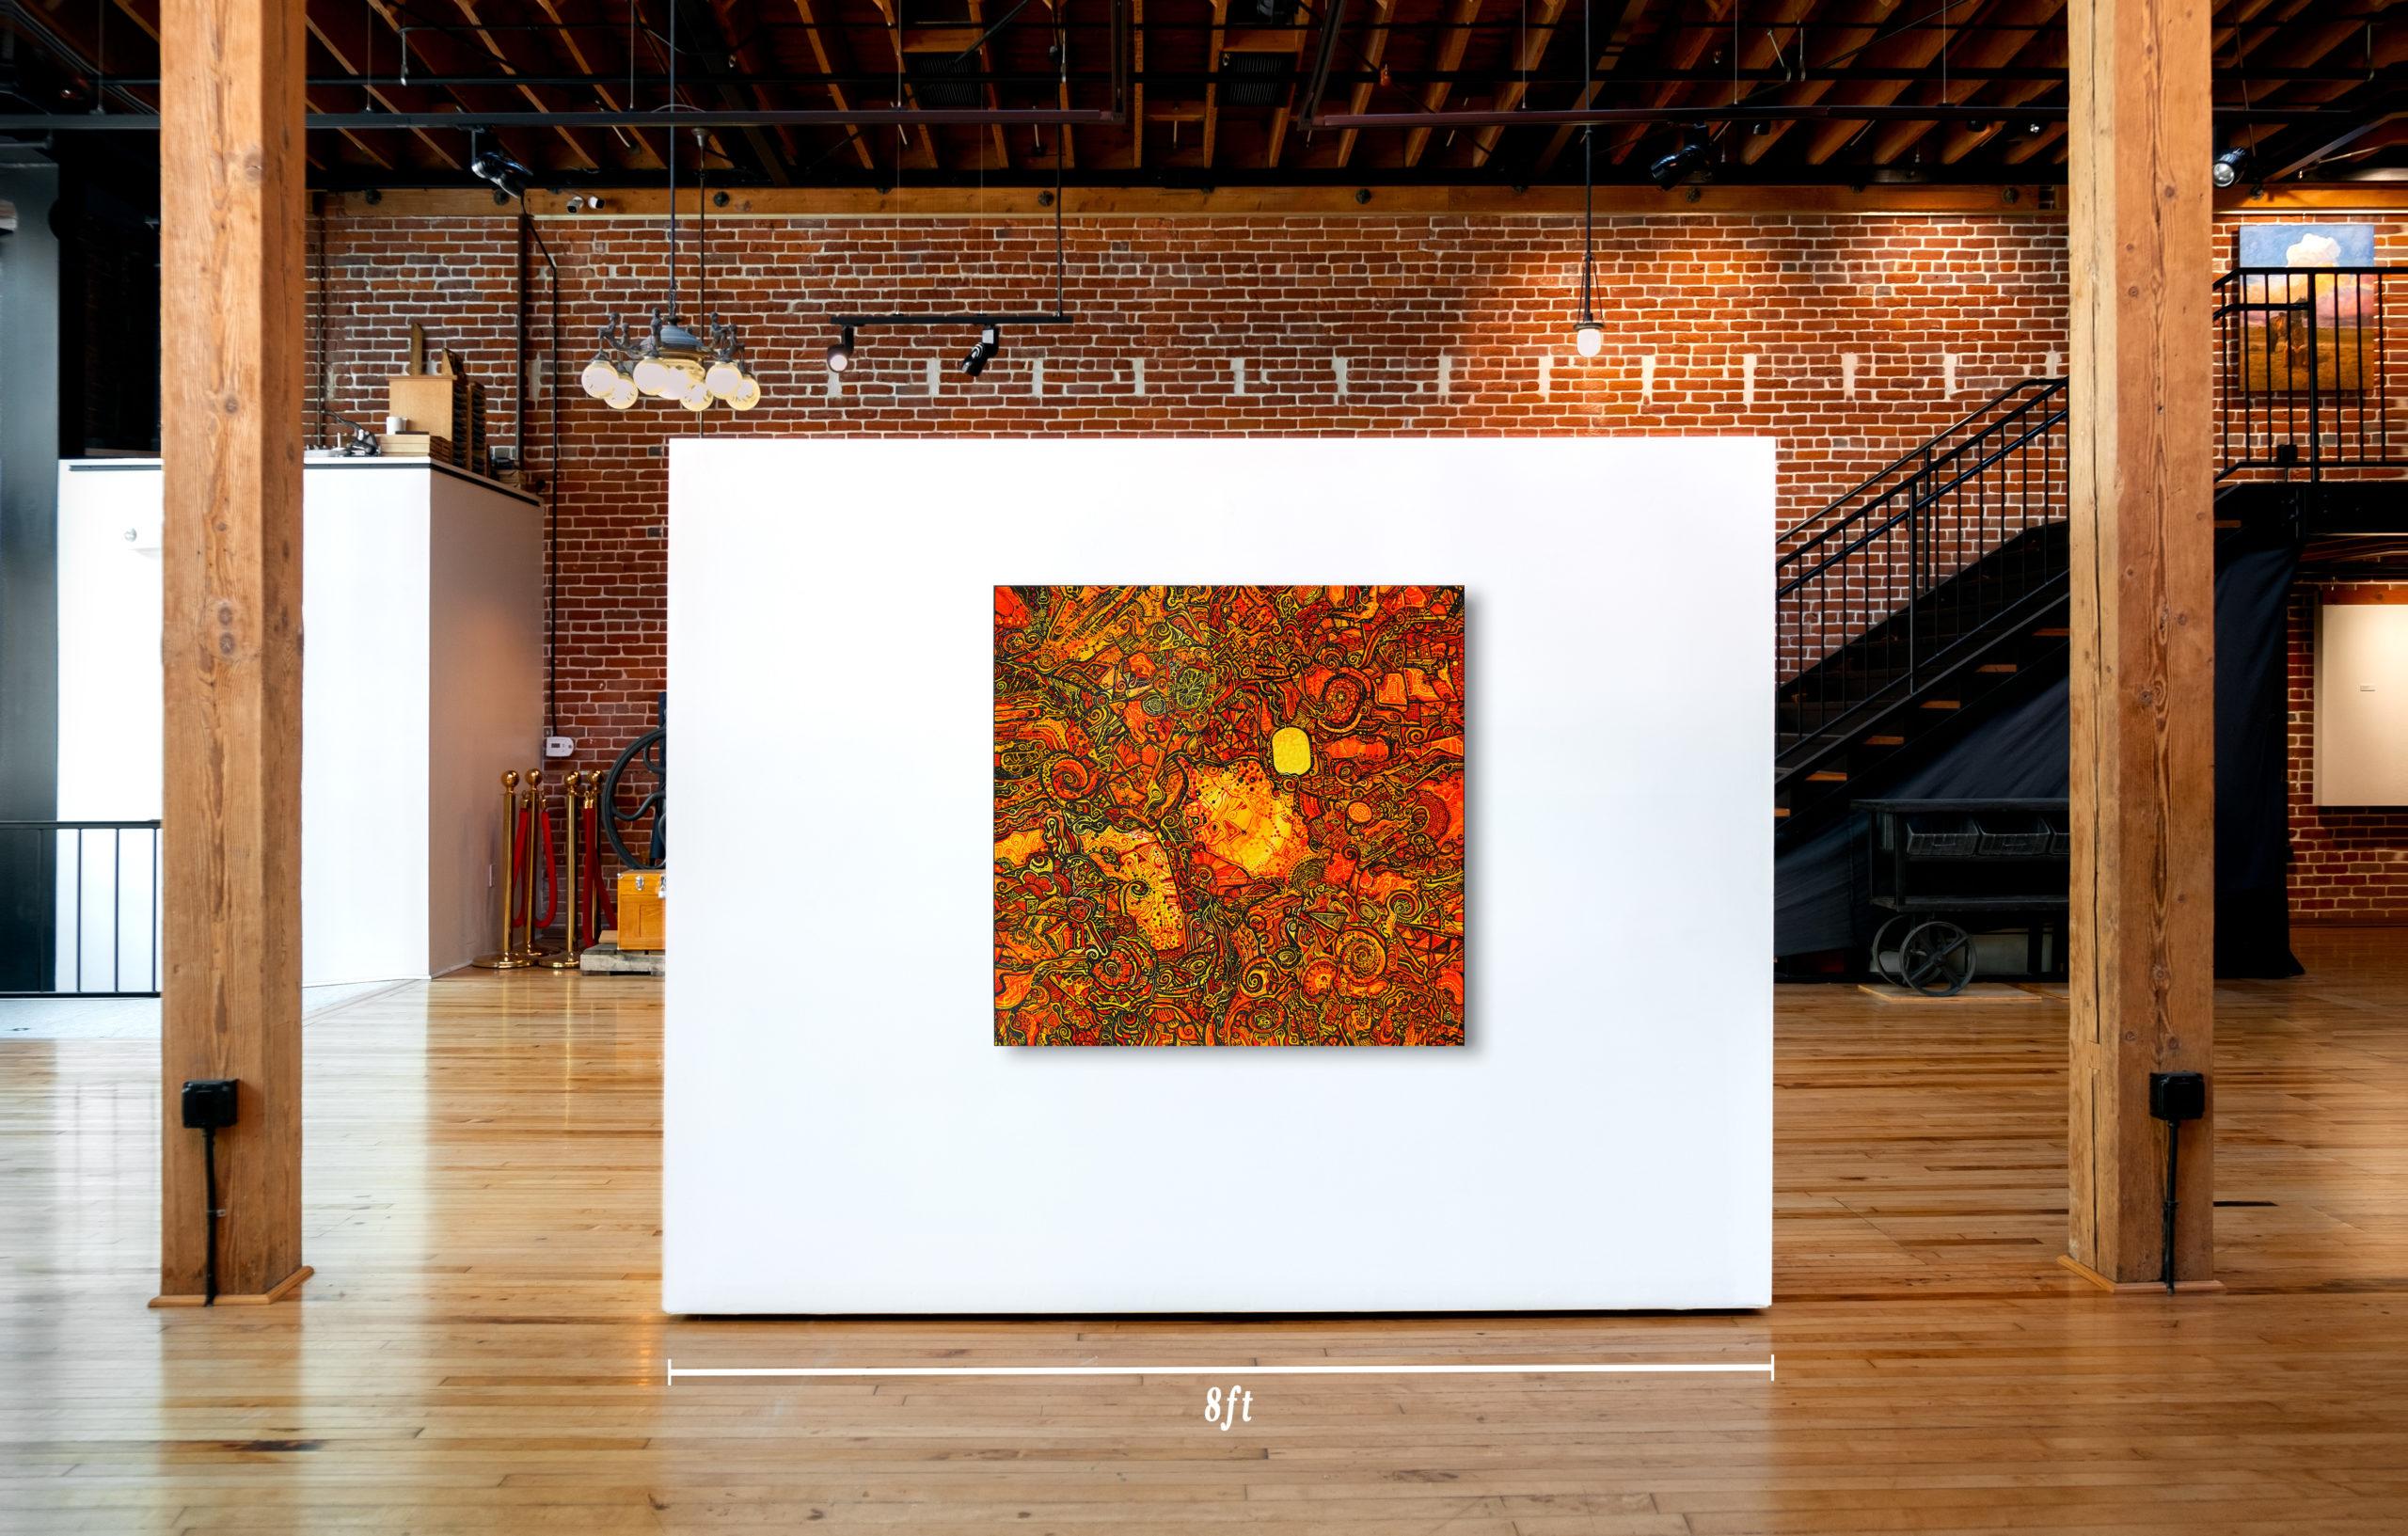 This is a one of a kind original cubist painting by San Diego artist, Alexander Arshansky. Its dimensions are 40x40. L'œuvre n'est pas encadrée.

This is an cubist abstract painting using bright orange, red, and yellow tones. This style could be